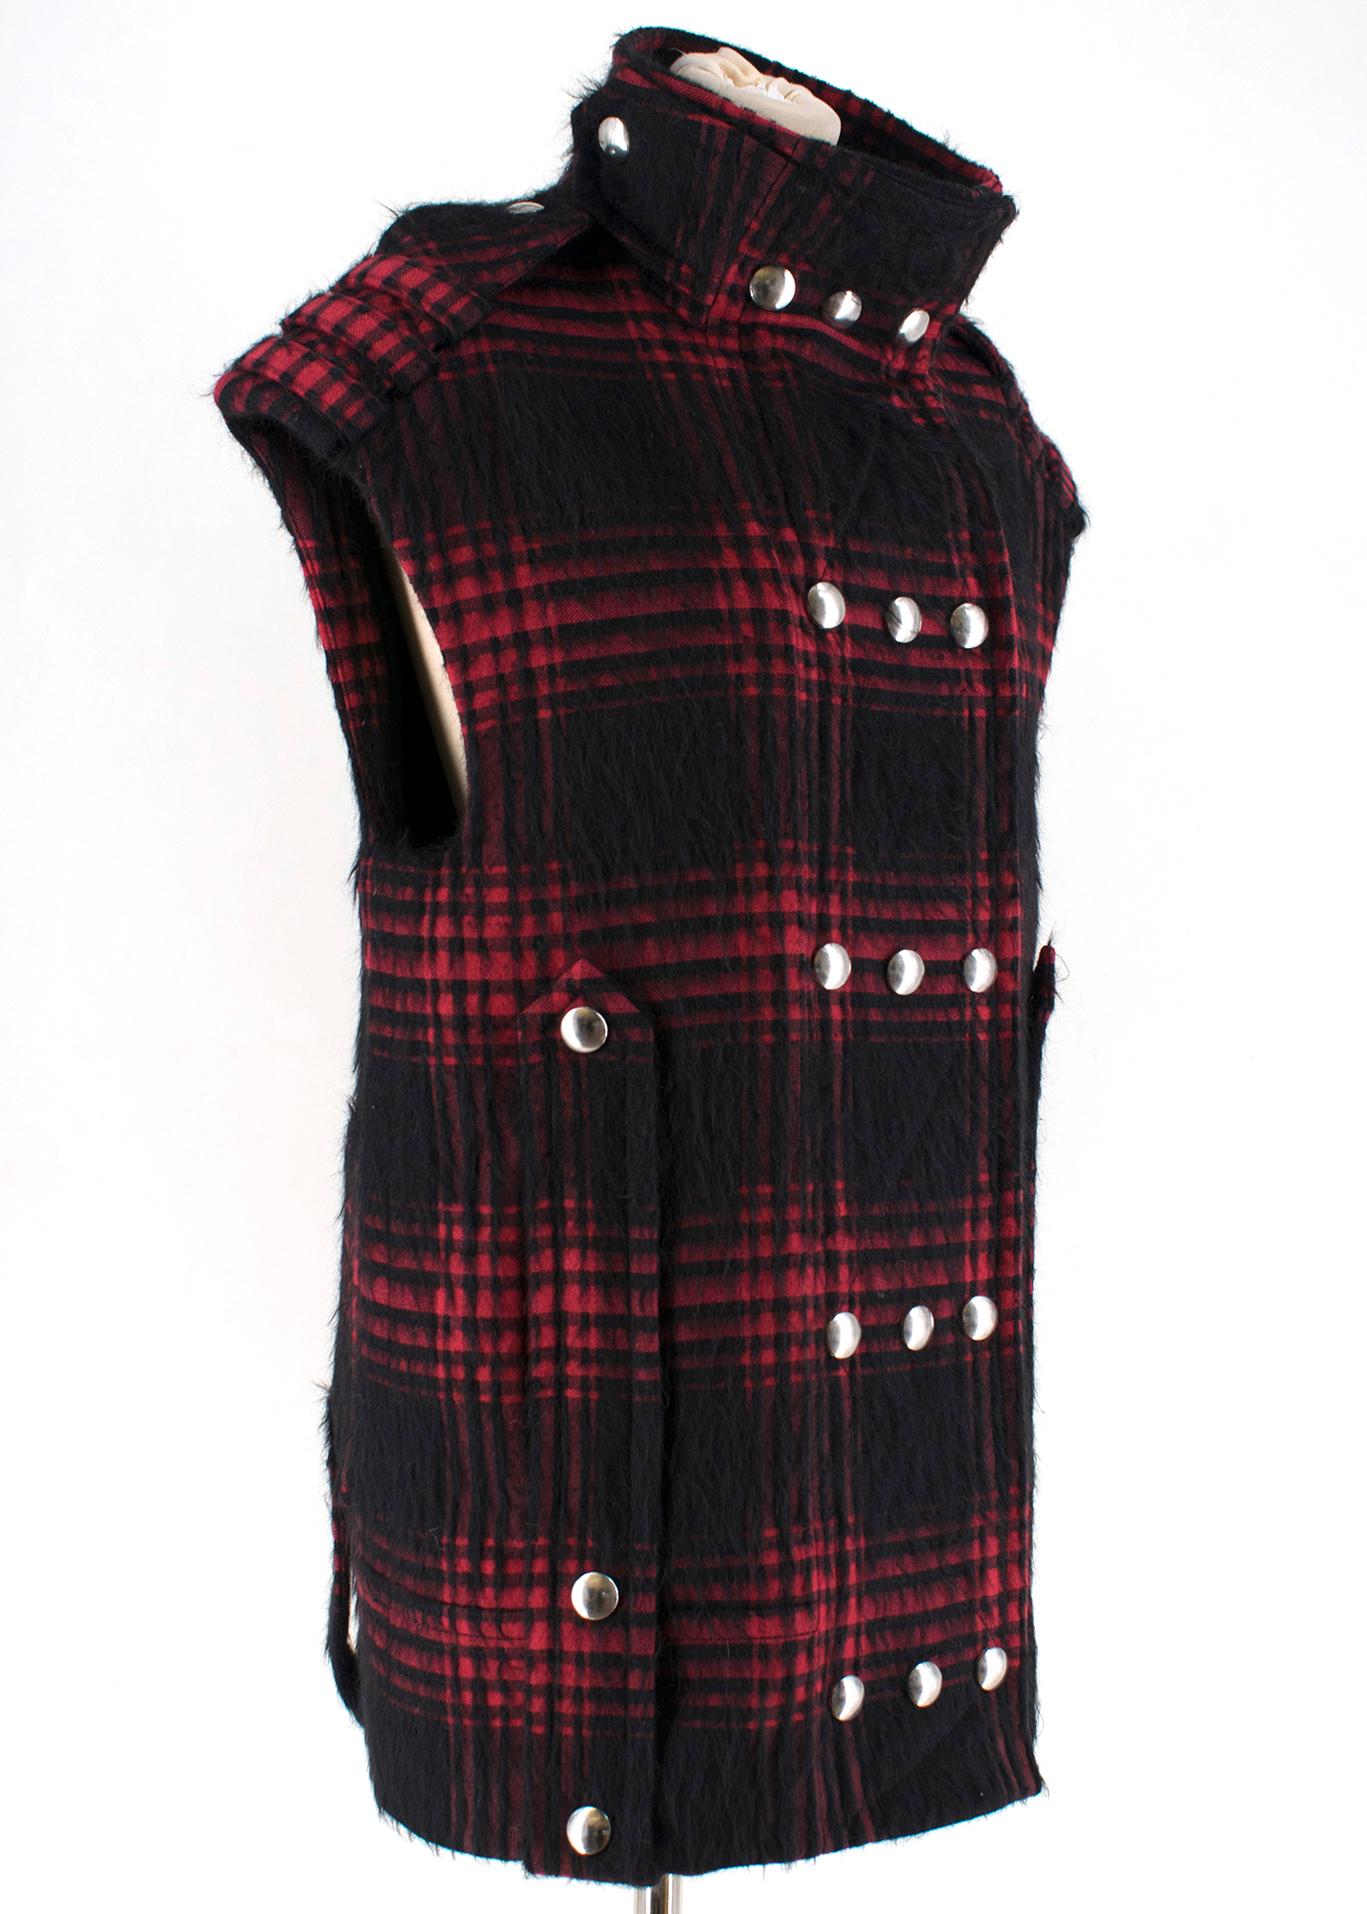 Alexander Wang Buffalo Plaid Brushed Wool Vest

Virgin wool & Alpaca blend
button closure;
neck button closure;

lining: 60% polyester 15% wool 10% rayon 10% acetate 5% cotton;

Please note, these items are pre-owned and may show signs of being